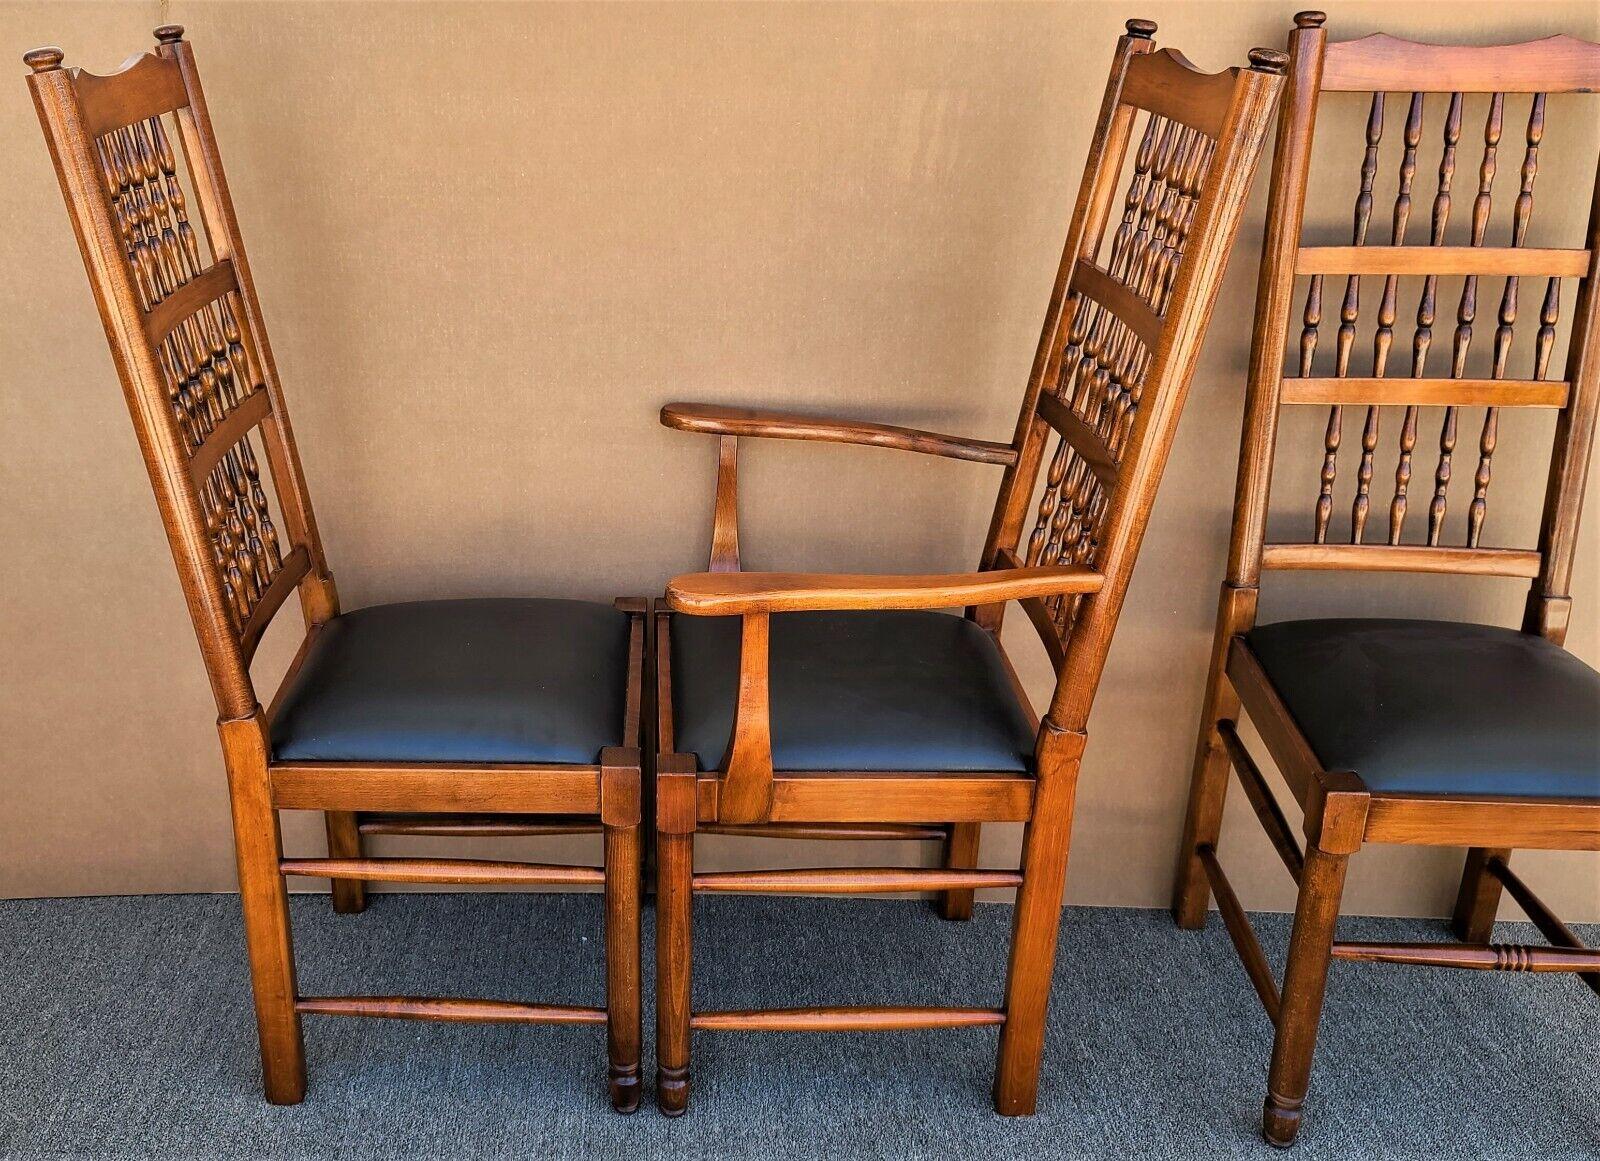 Lovato Luigi Tuscan Italian Dining Chairs, Set of 6 In Good Condition For Sale In Lake Worth, FL